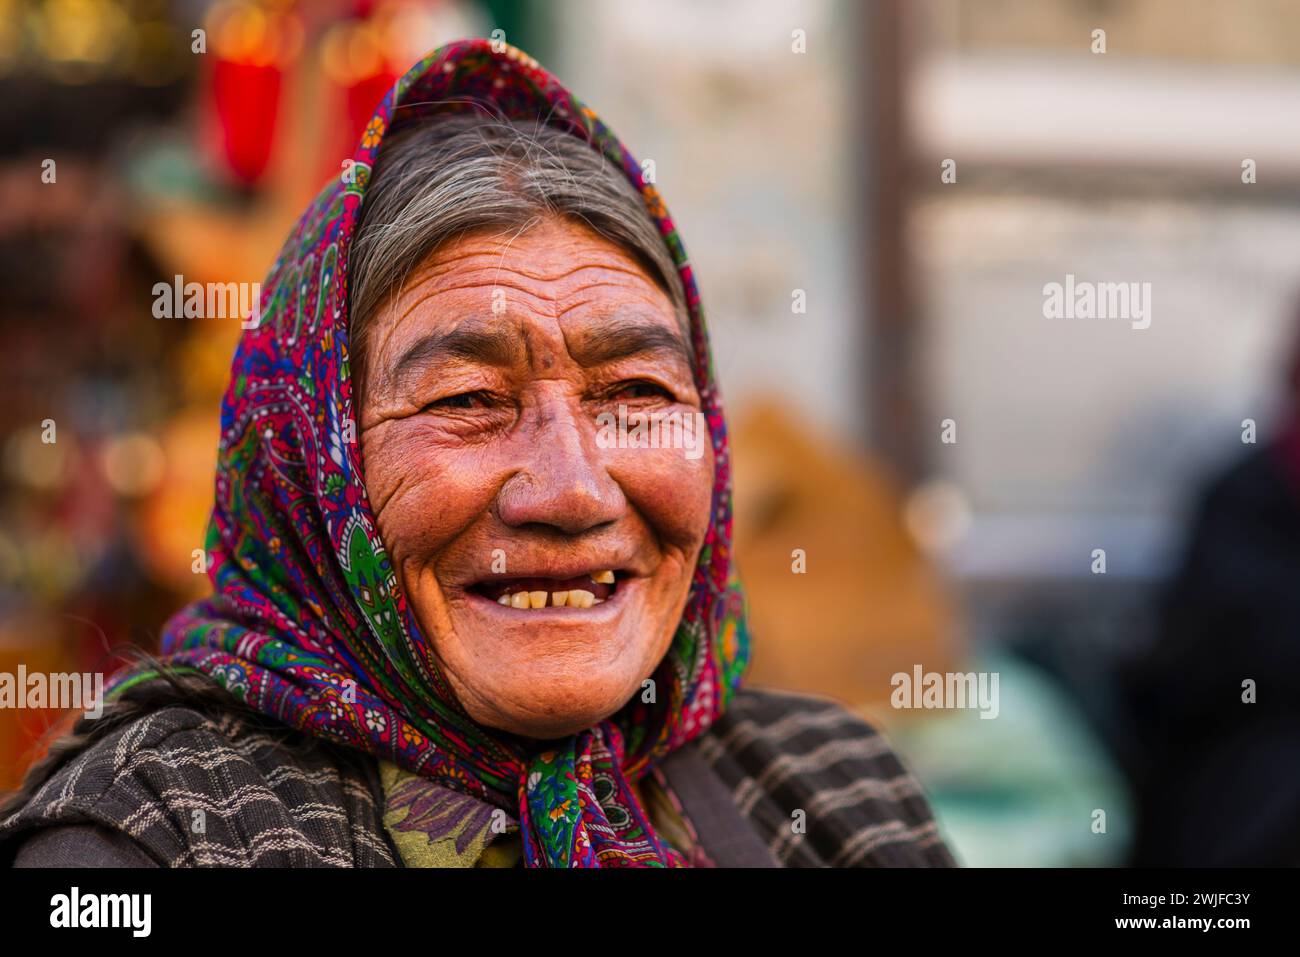 A portrait of a Ladakhi woman wearing a headscarf, looking away from the camera. Stock Photo